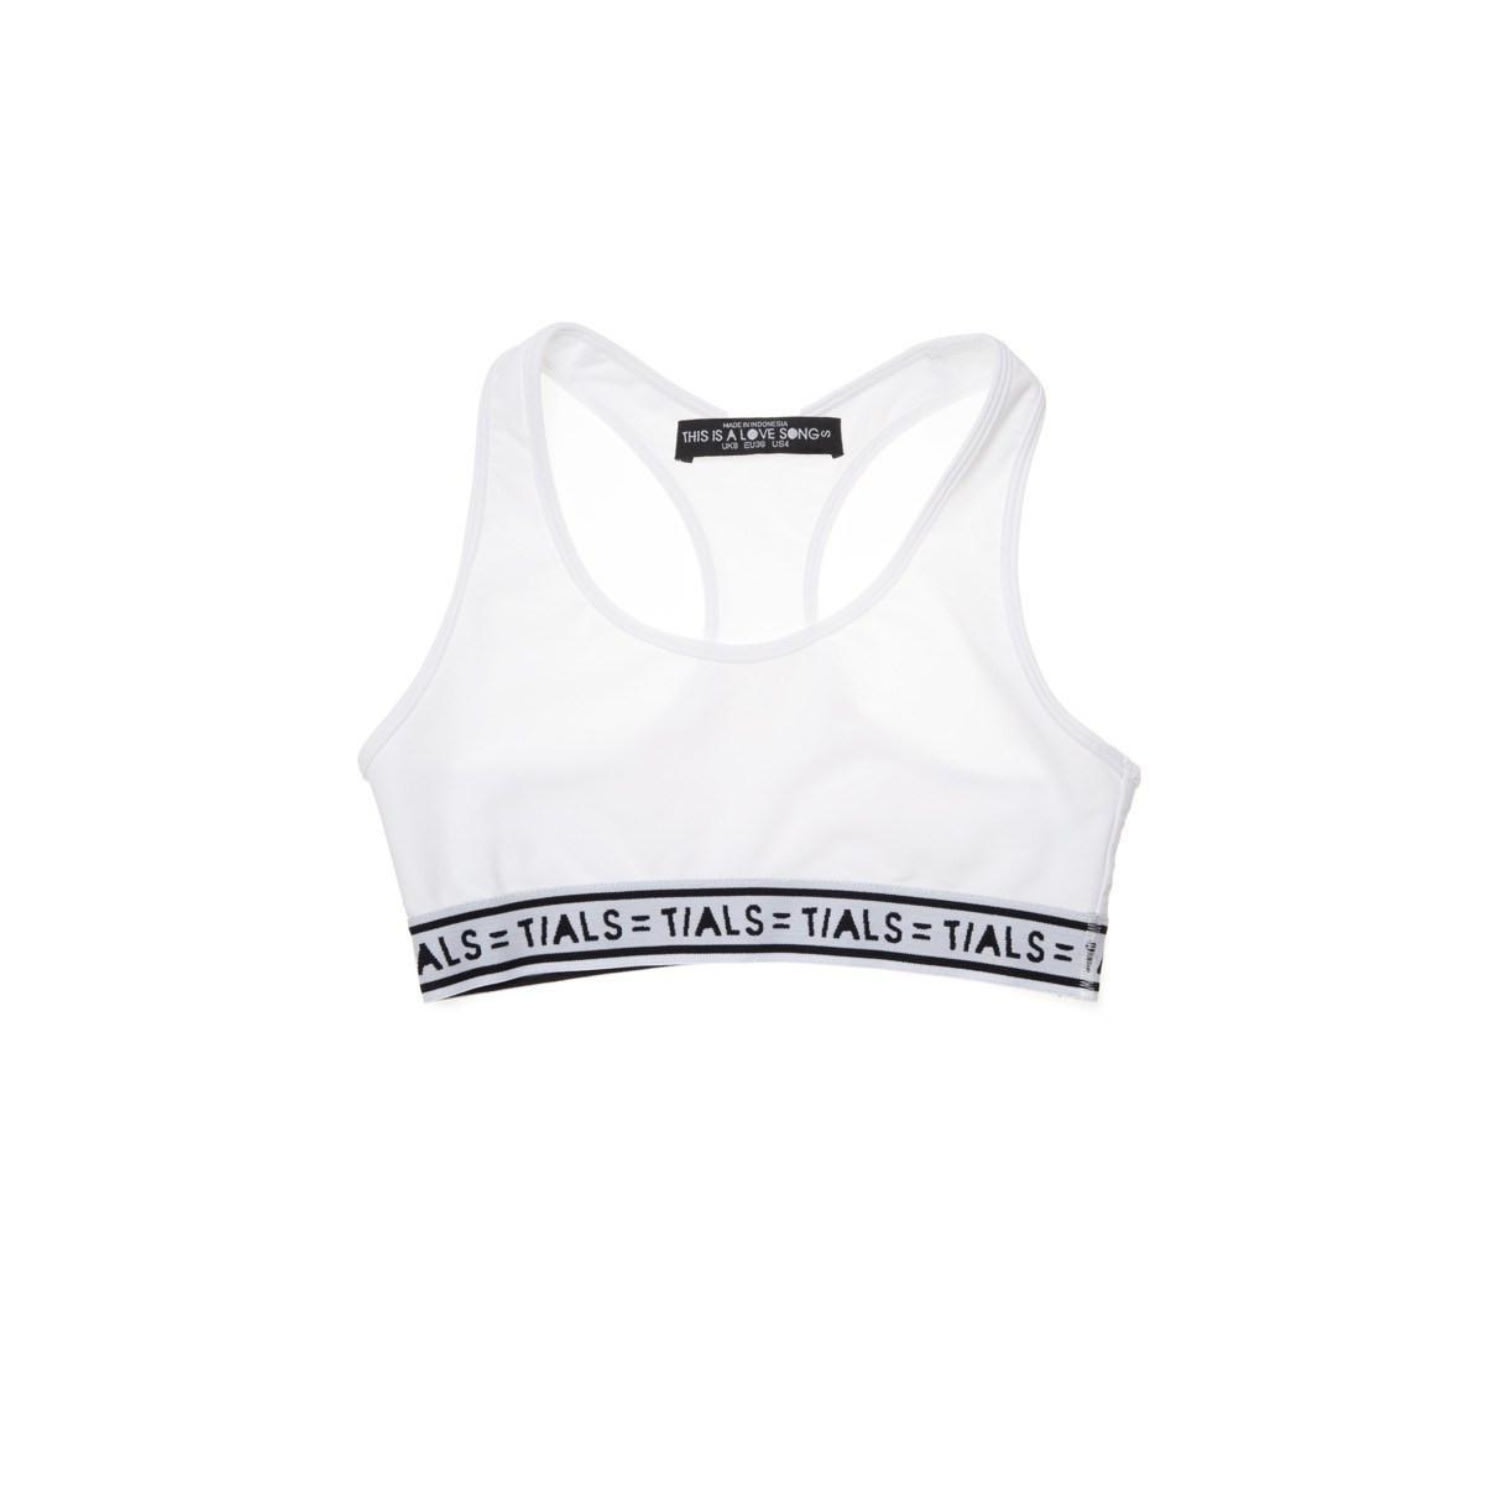 THIS IS A LOVE SONG - Logo Racerback Bra White